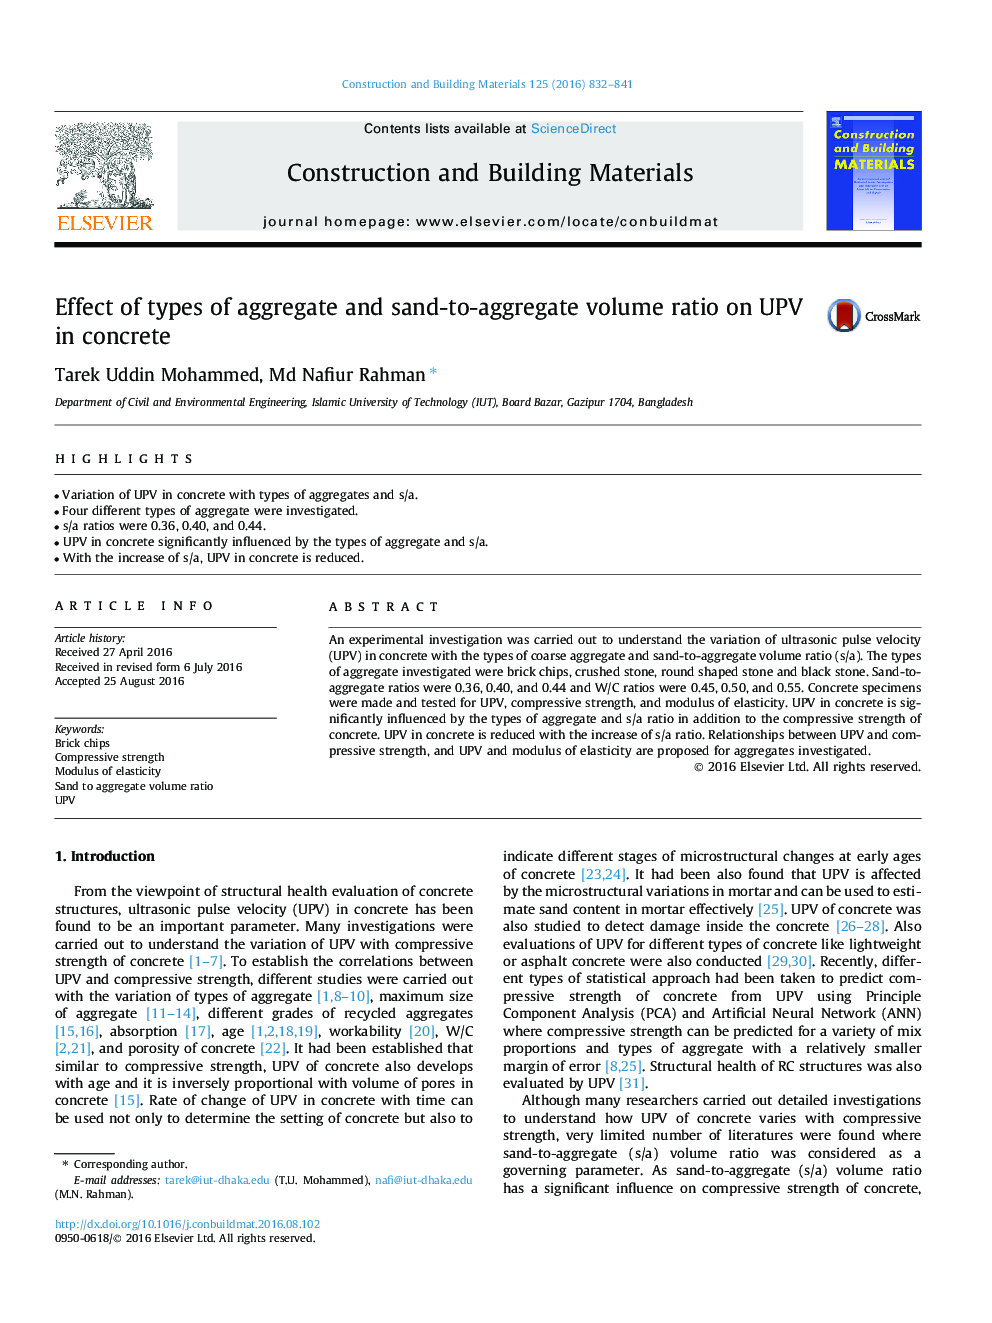 Effect of types of aggregate and sand-to-aggregate volume ratio on UPV in concrete